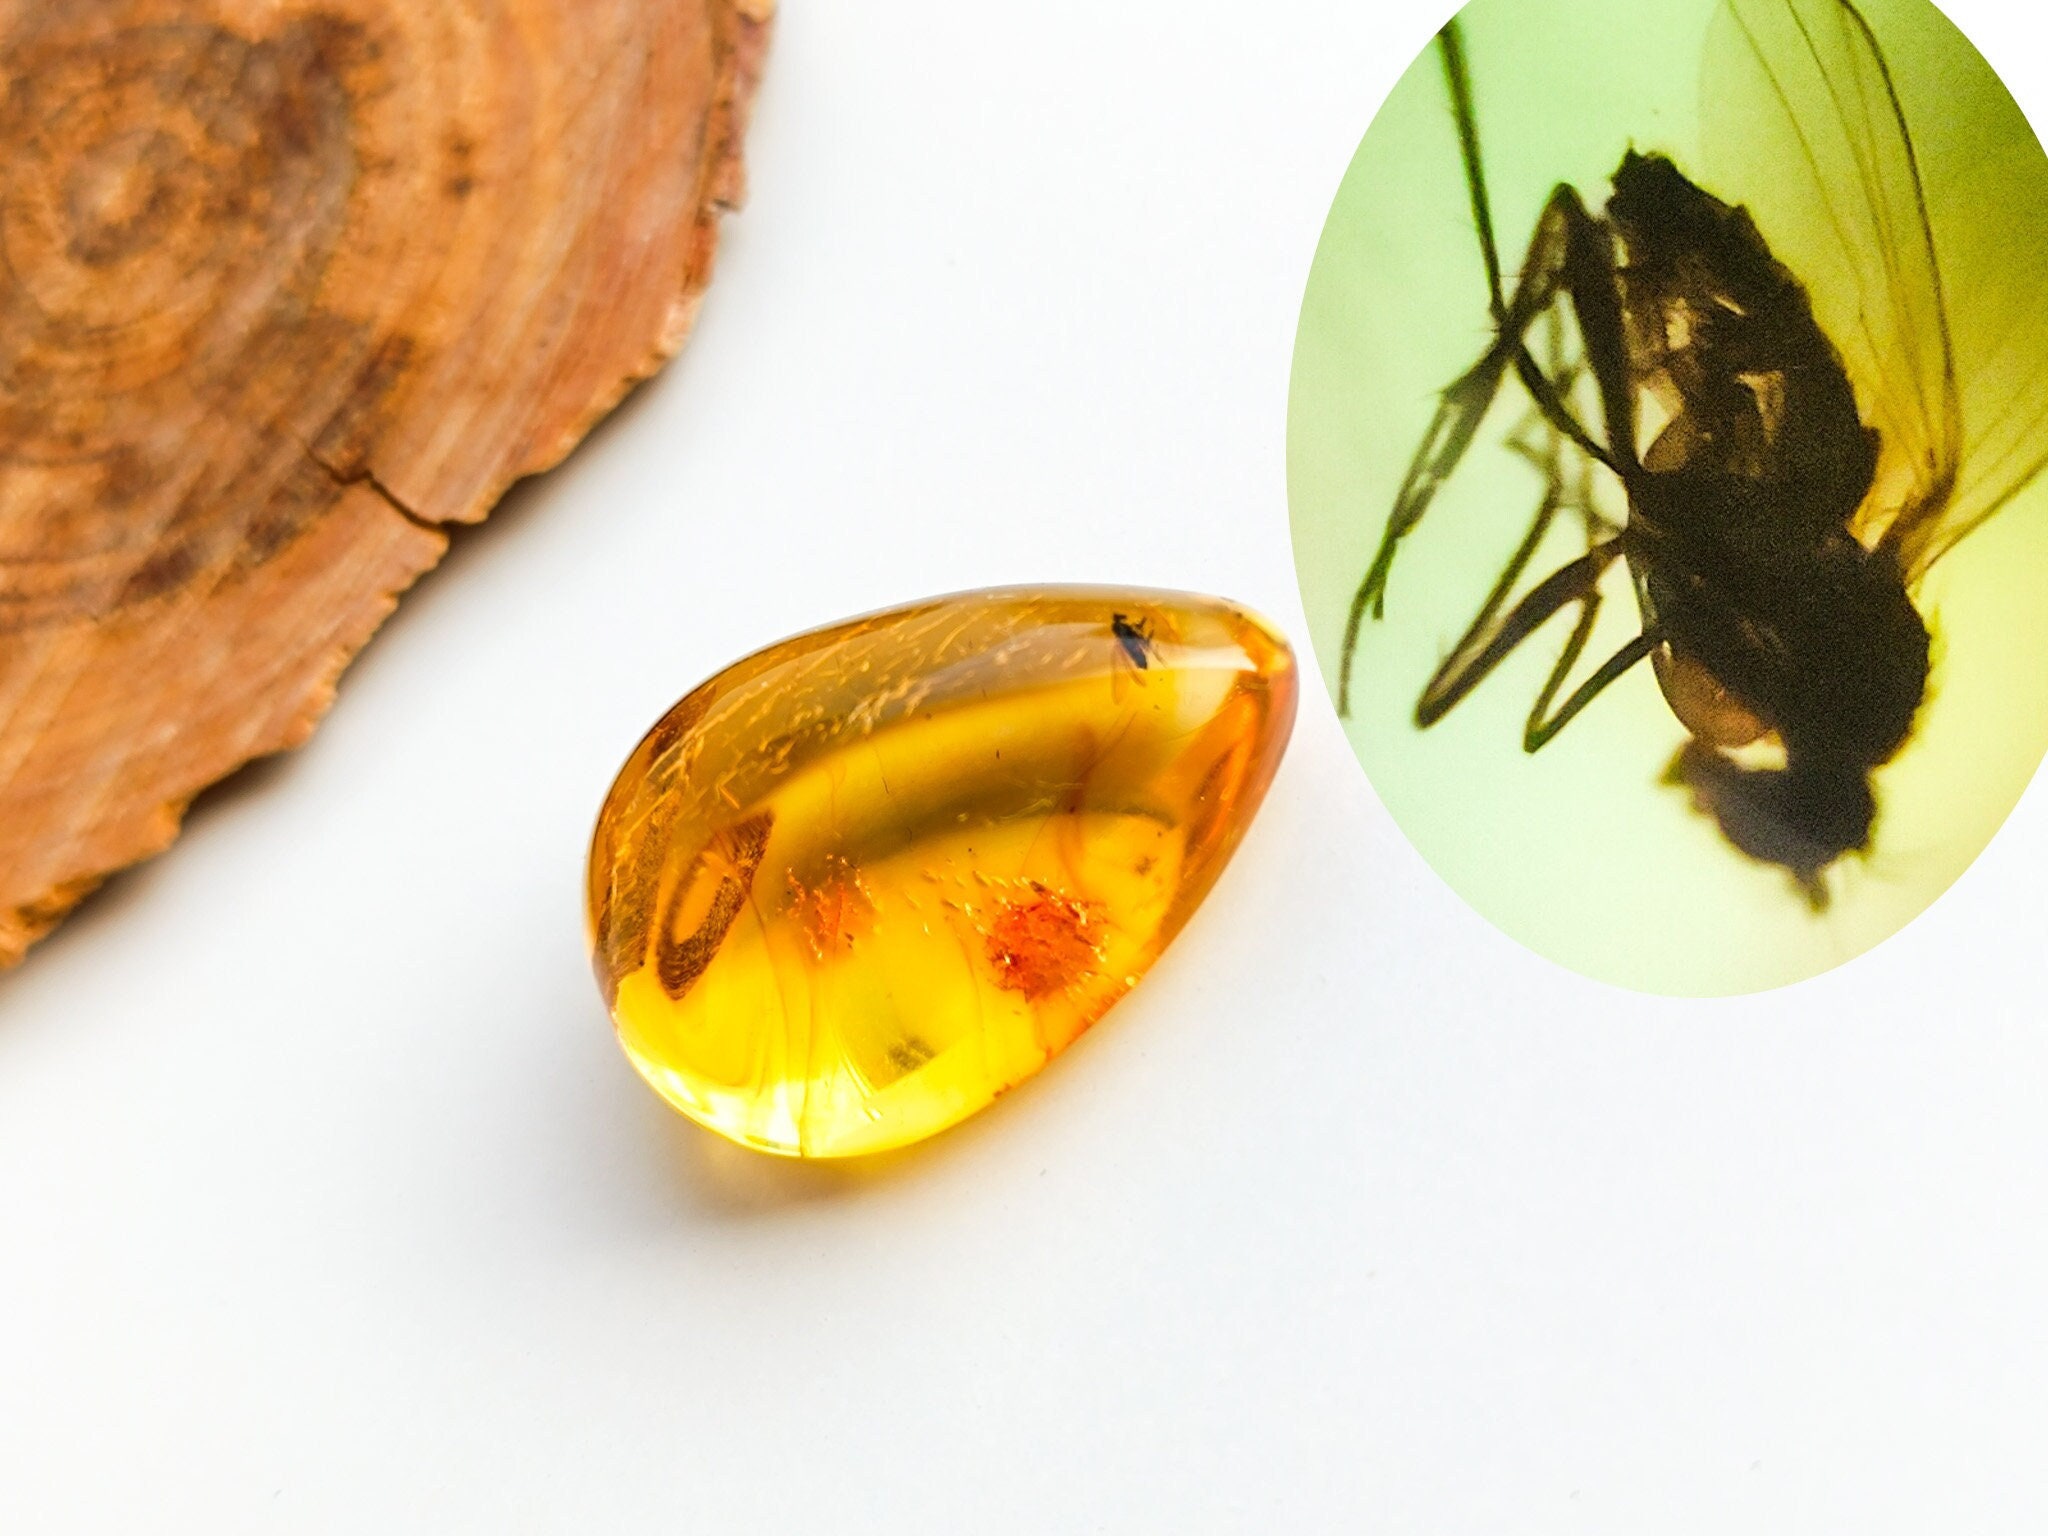 Amber With Insects Home Decoration, Large Oval Amber Resin